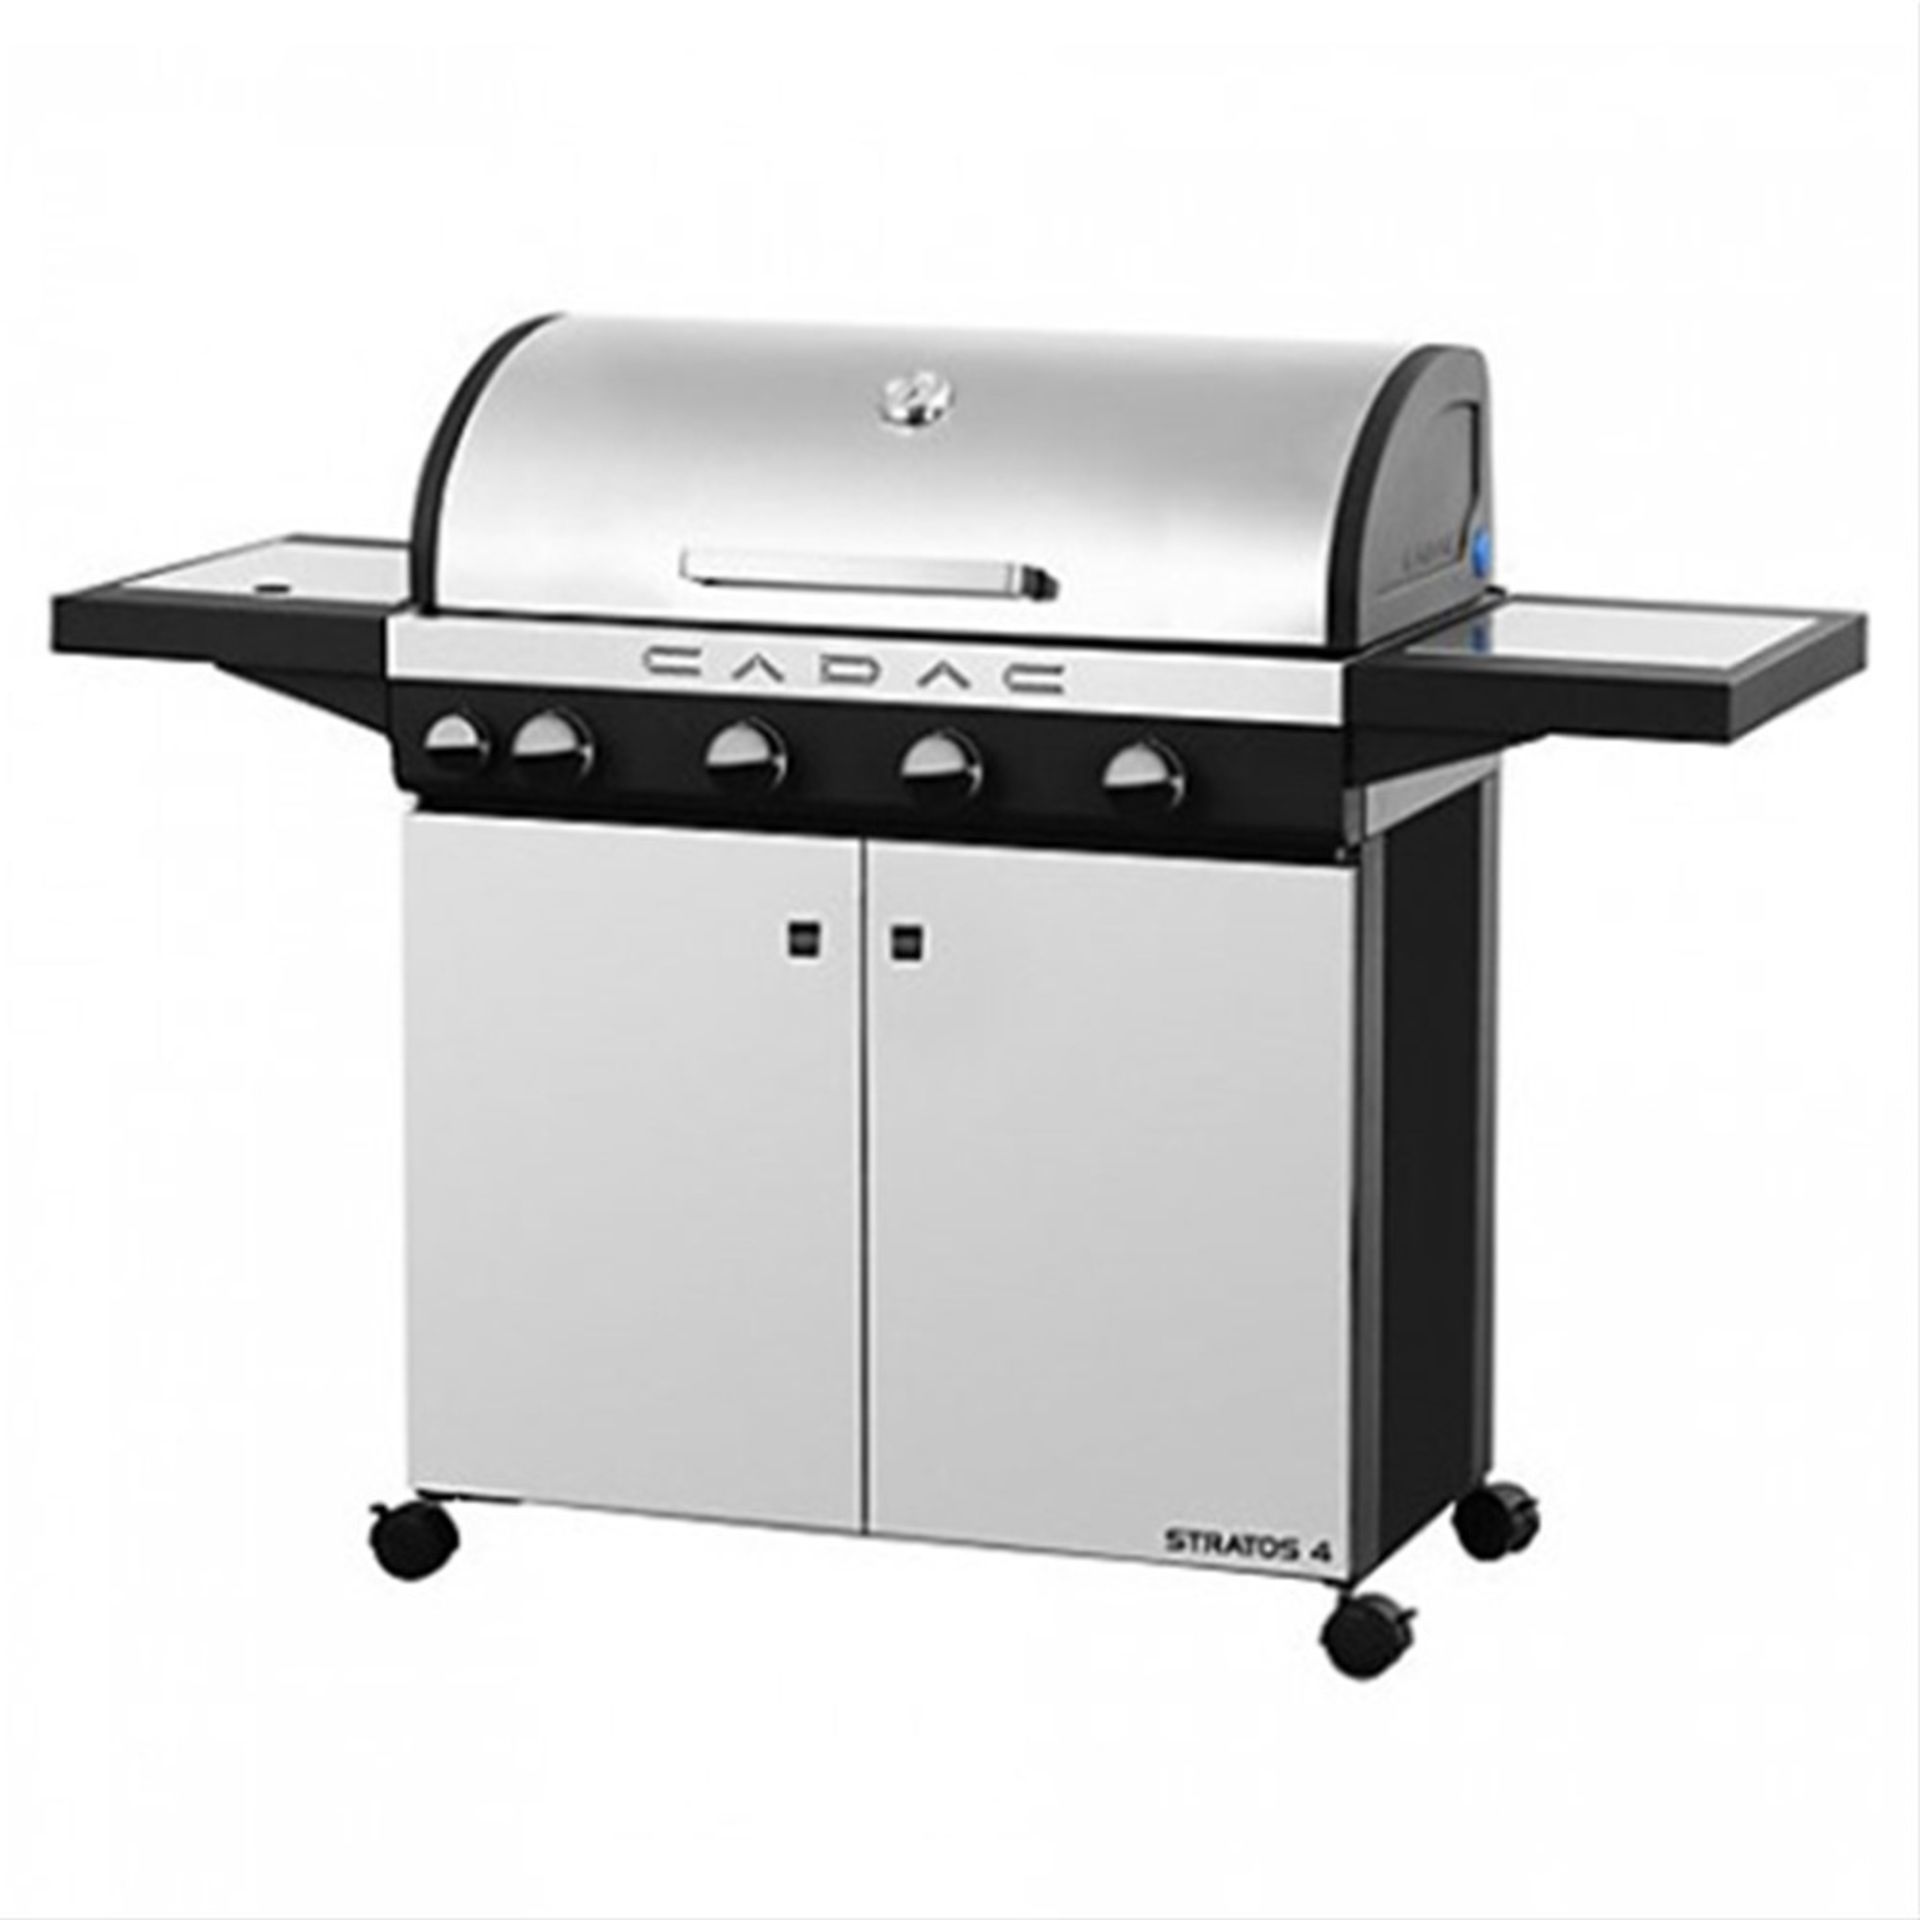 1 x BOXED CADAC STRATUS 2 DOUBLE SKINNED DOME AND SIDE BURNER BBQ (2204455)(1.9.16) *PLEASE NOTE